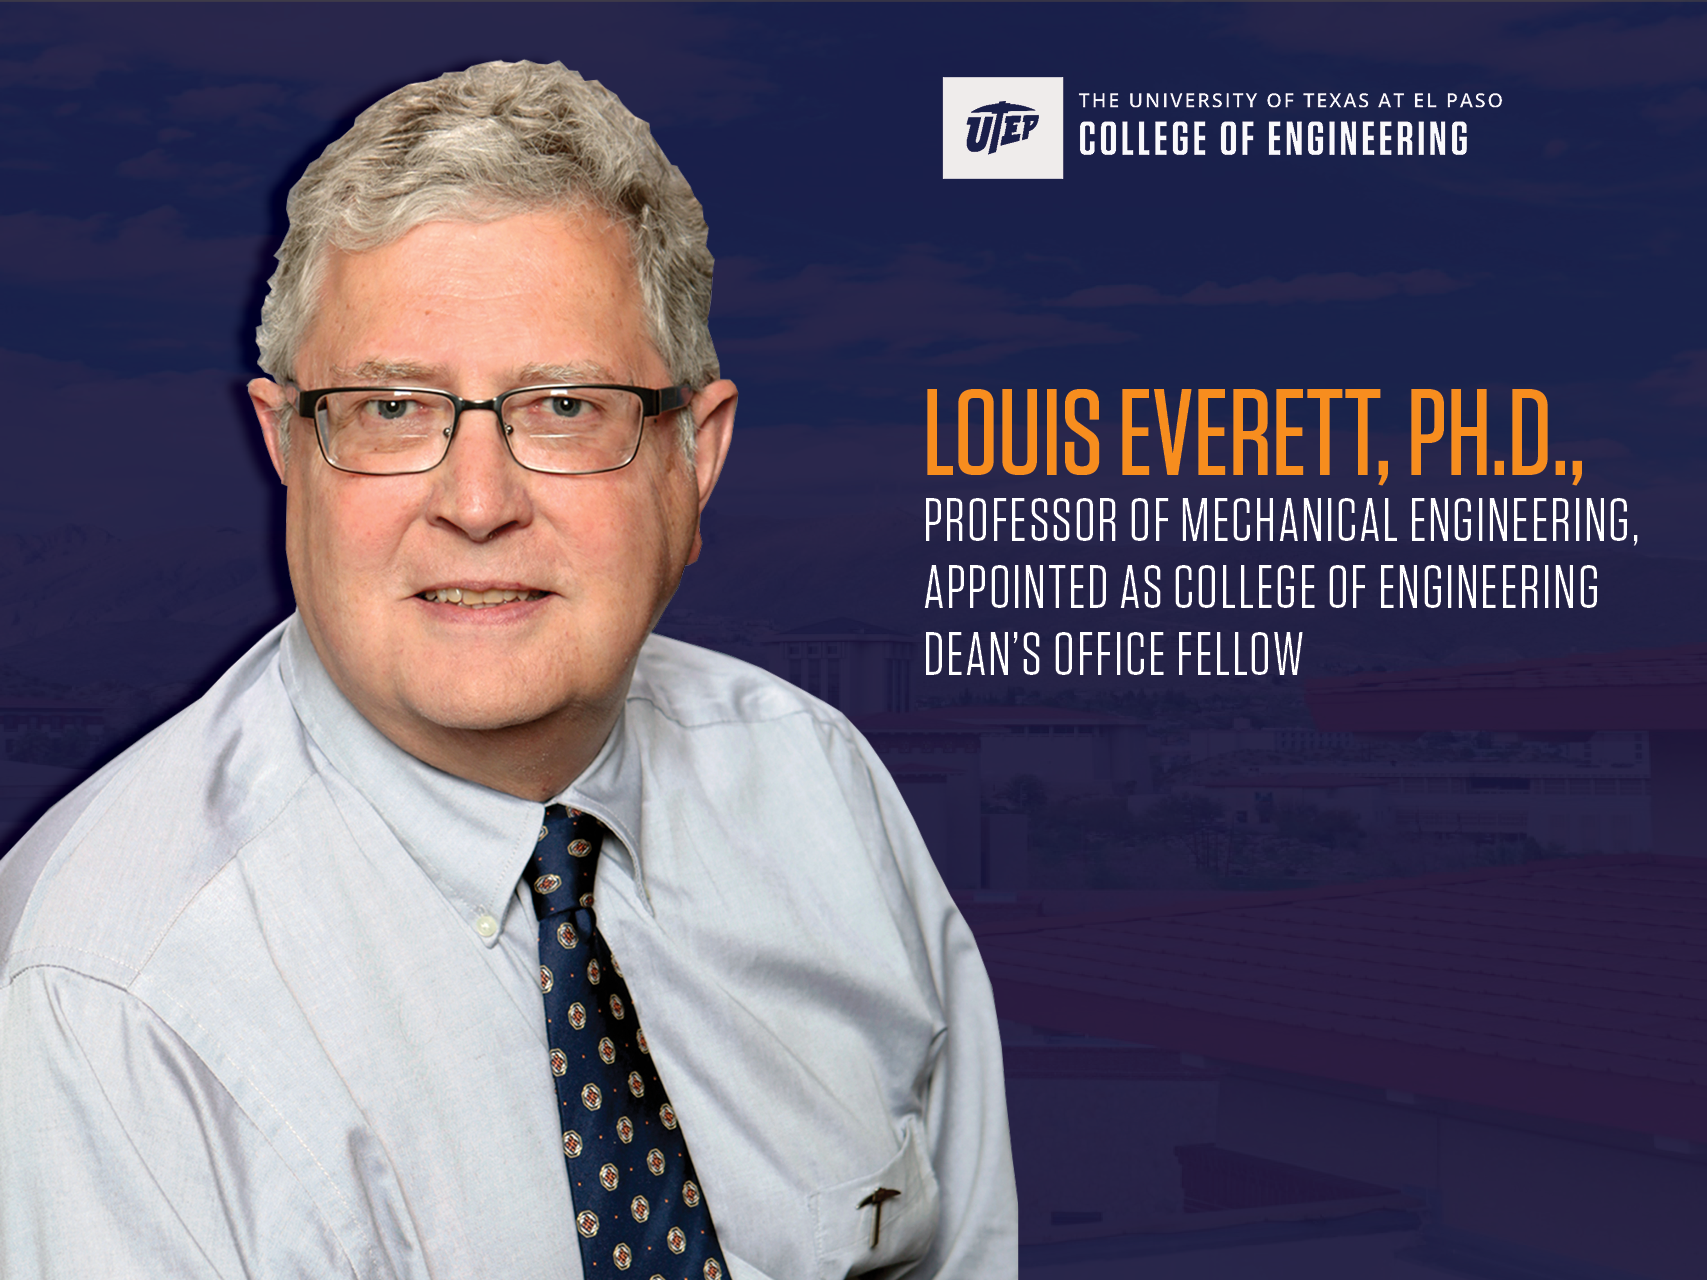 Louis Everett, Ph.D., appointed as College of Engineering Dean’s Office Fellow